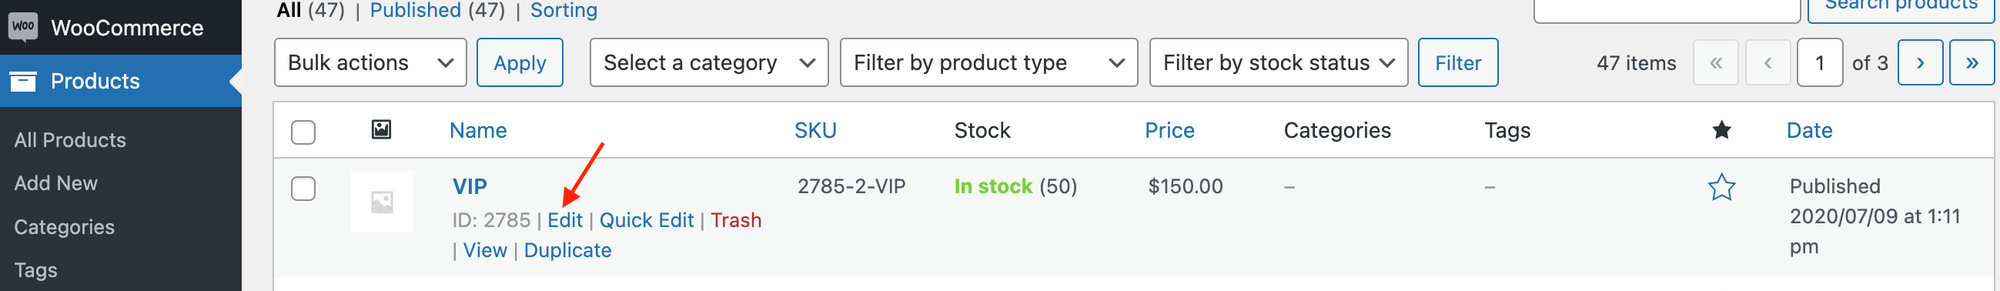 Find ticket that you'd like to disable taxes for under WooCommerce > Products.